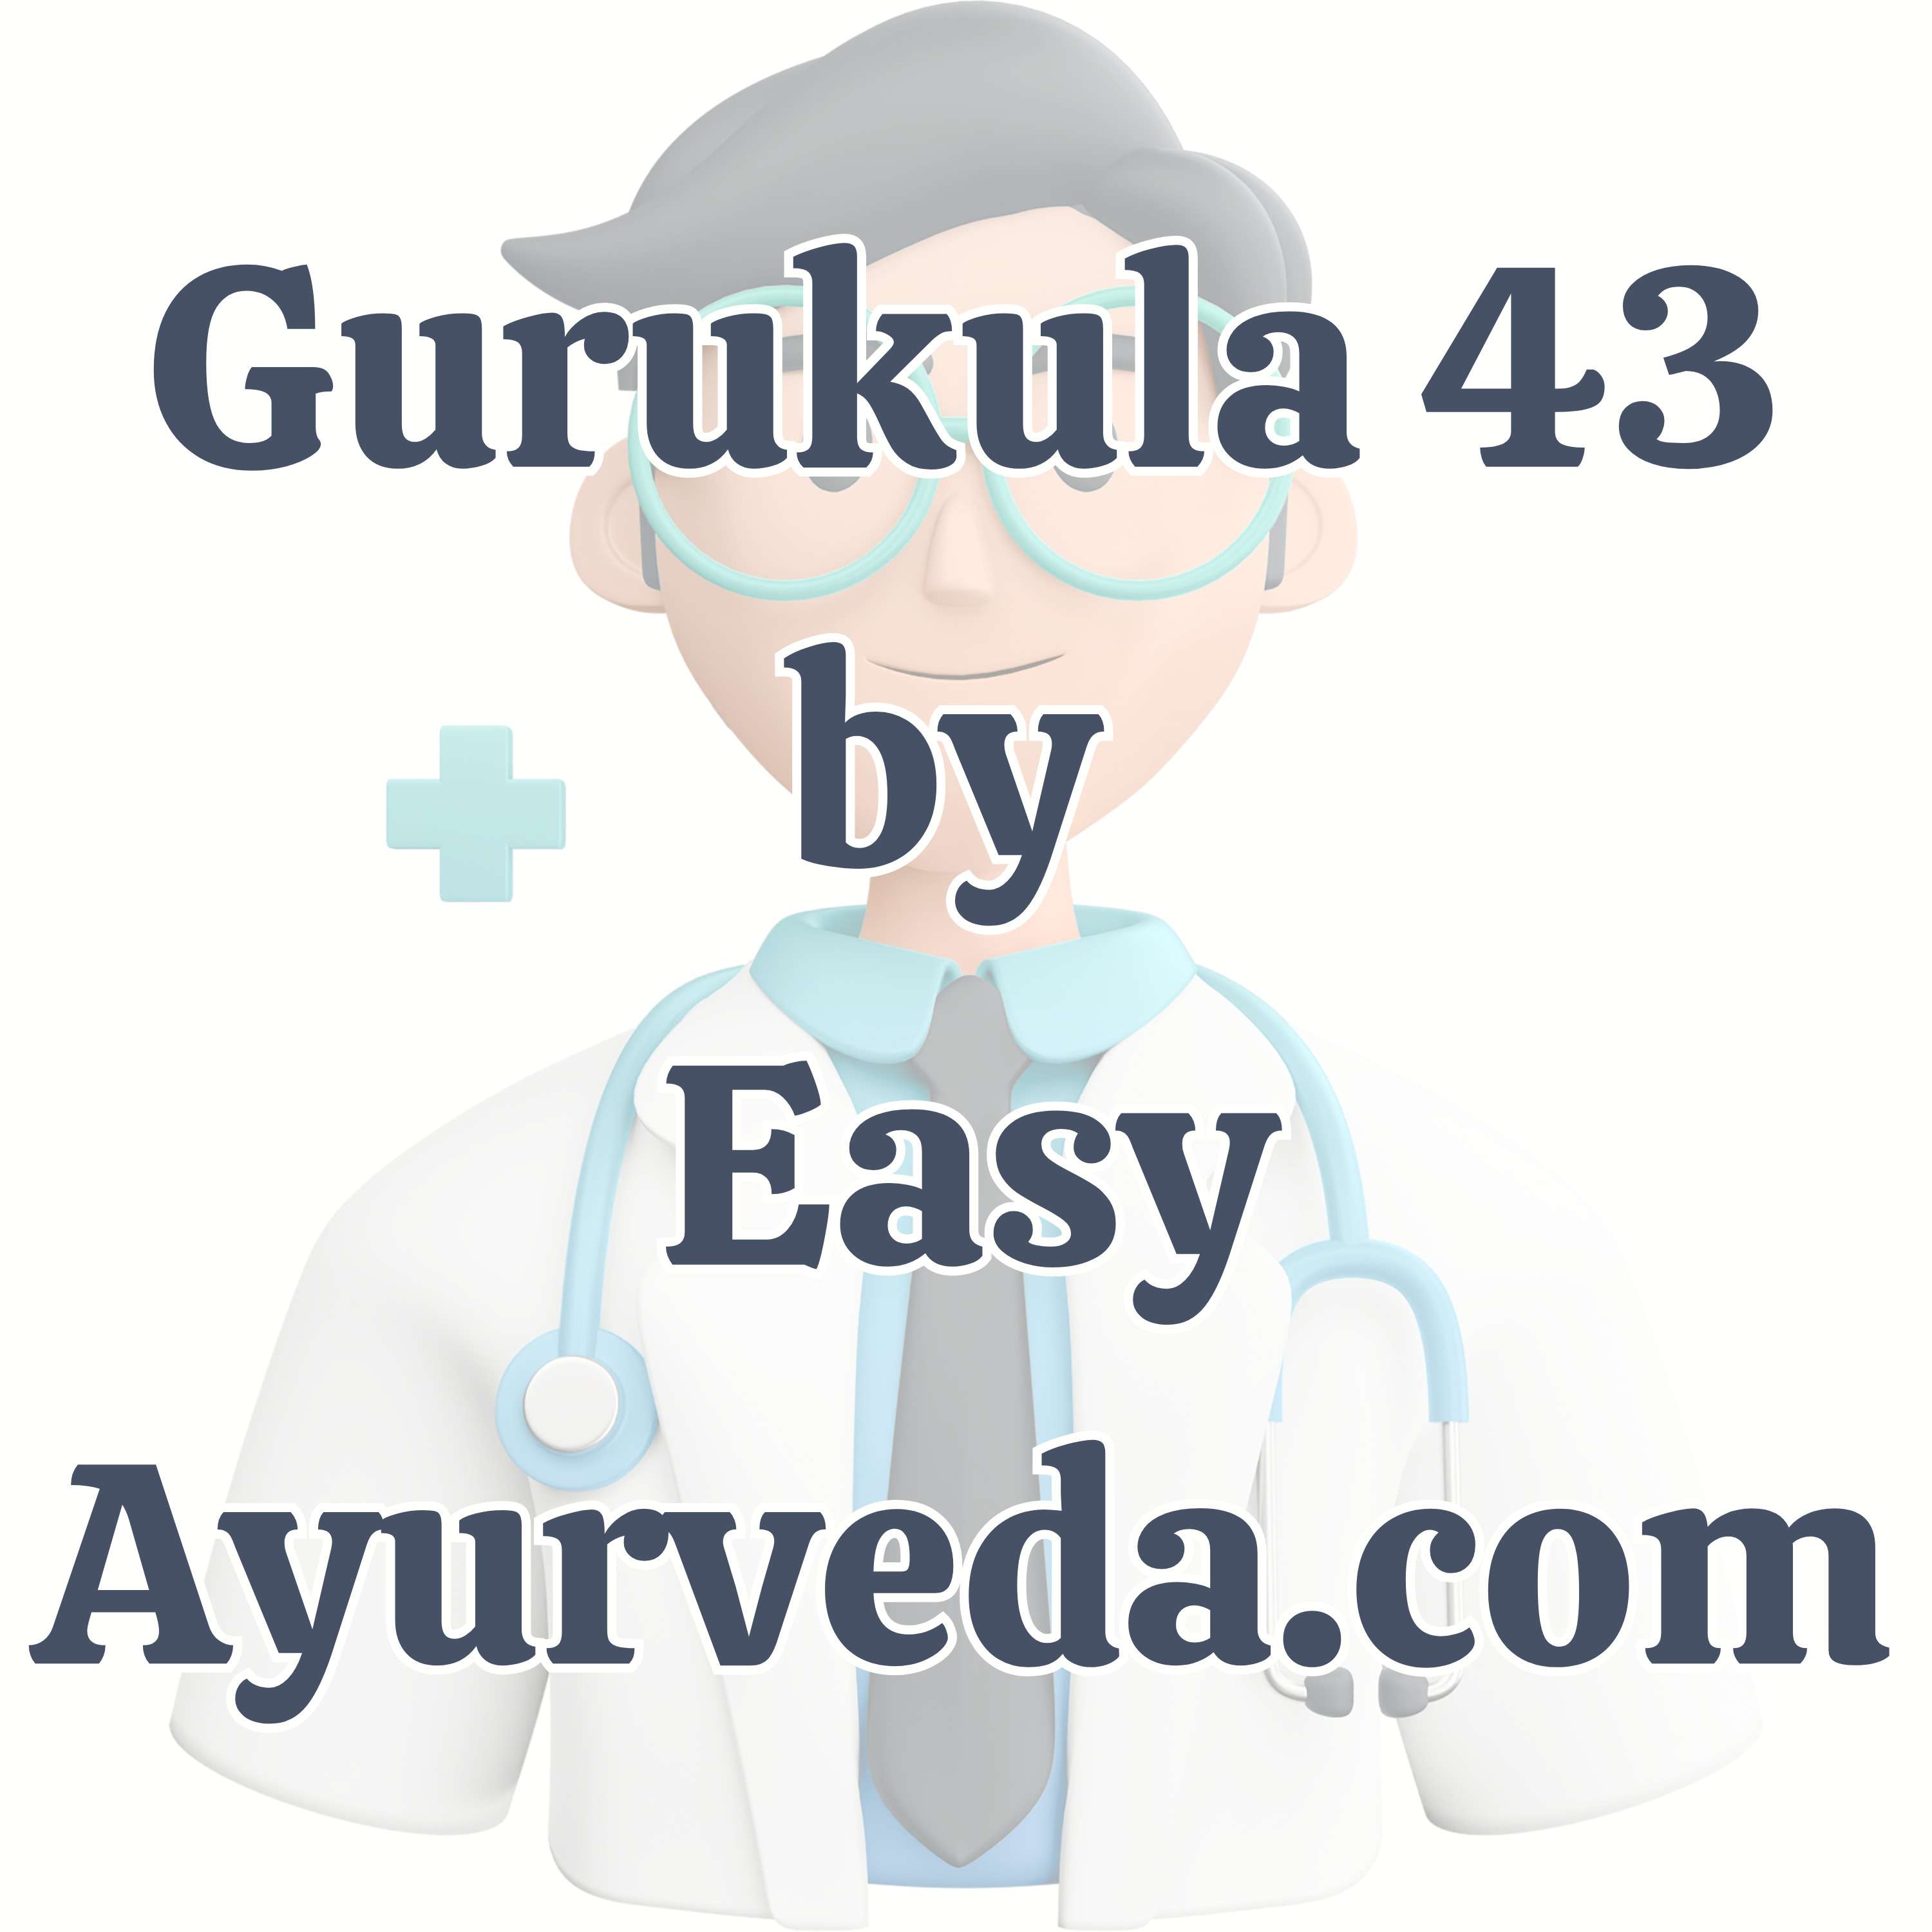 Gurukula 43: How to integrate Allopathy and Ayurveda in treatment of Lymphoedema and Chronic Skin Disease